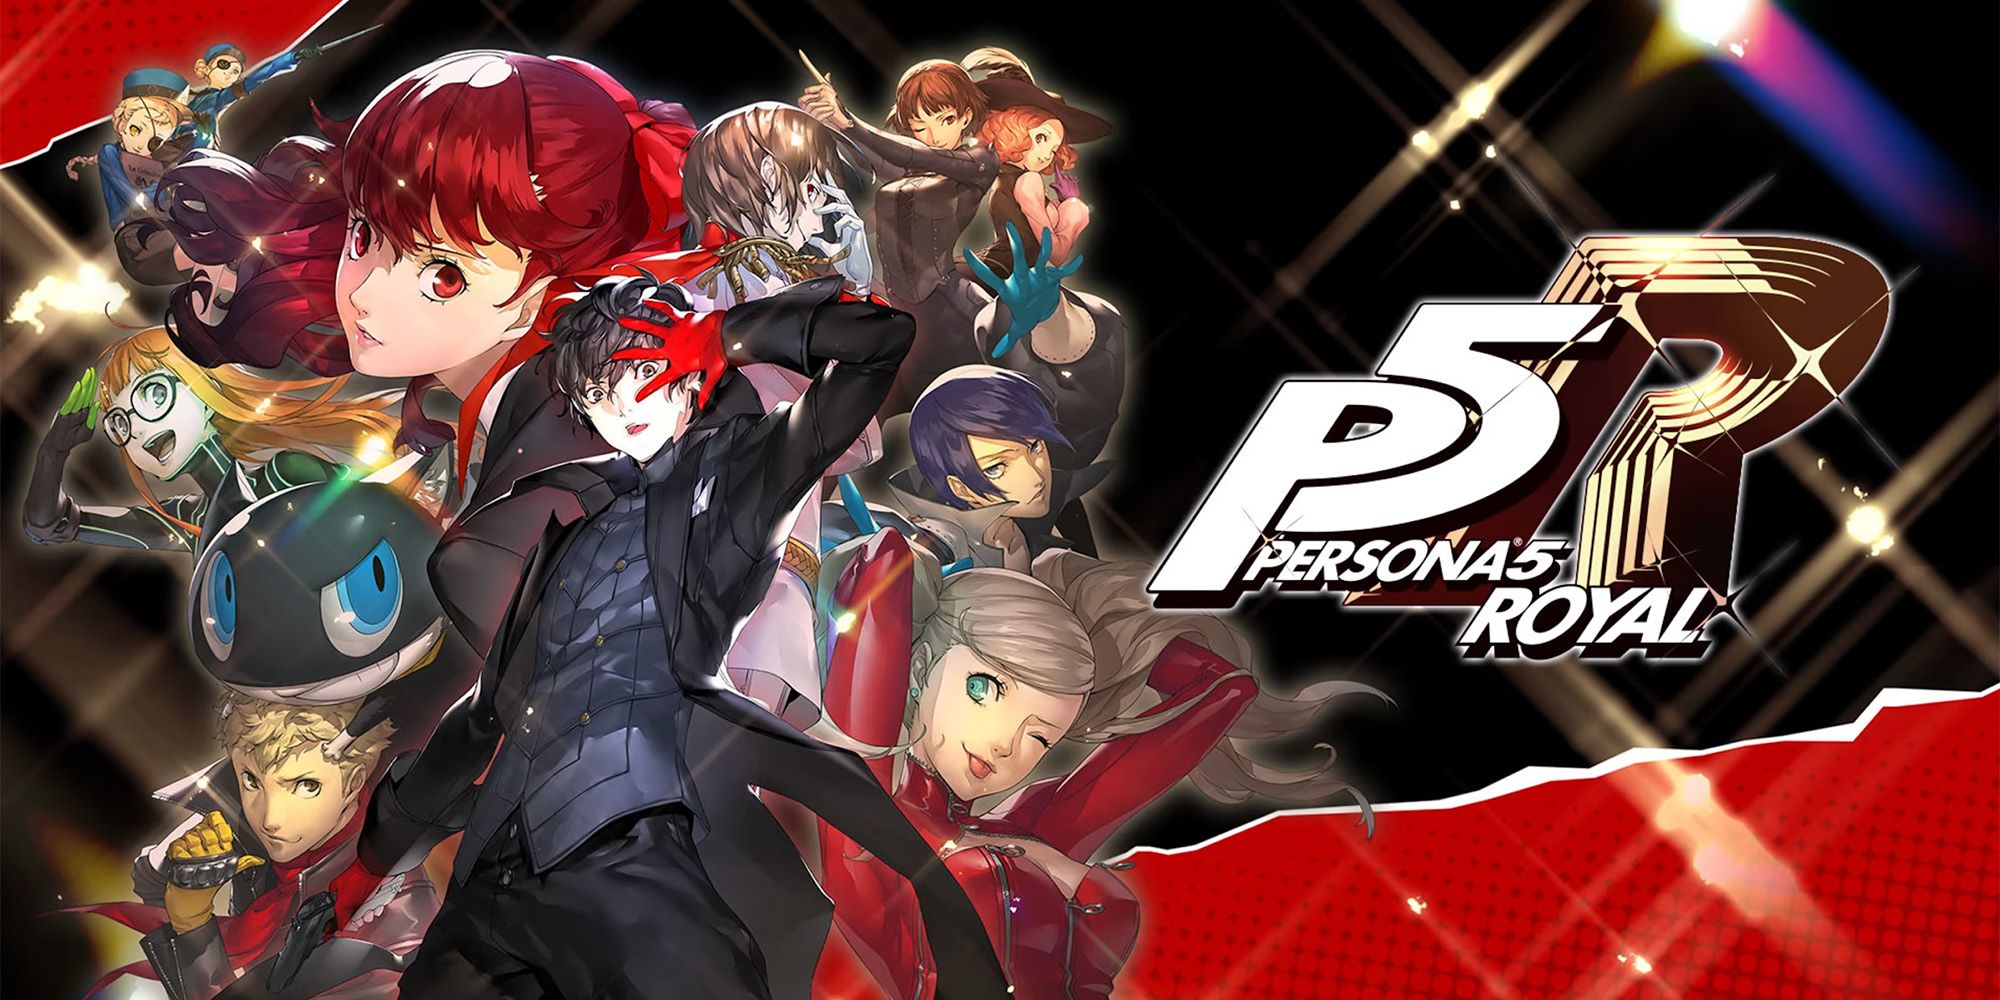 Persona 5 Royal - Joker, Ann, Morgana, and the rest of the main cast posing on a red background